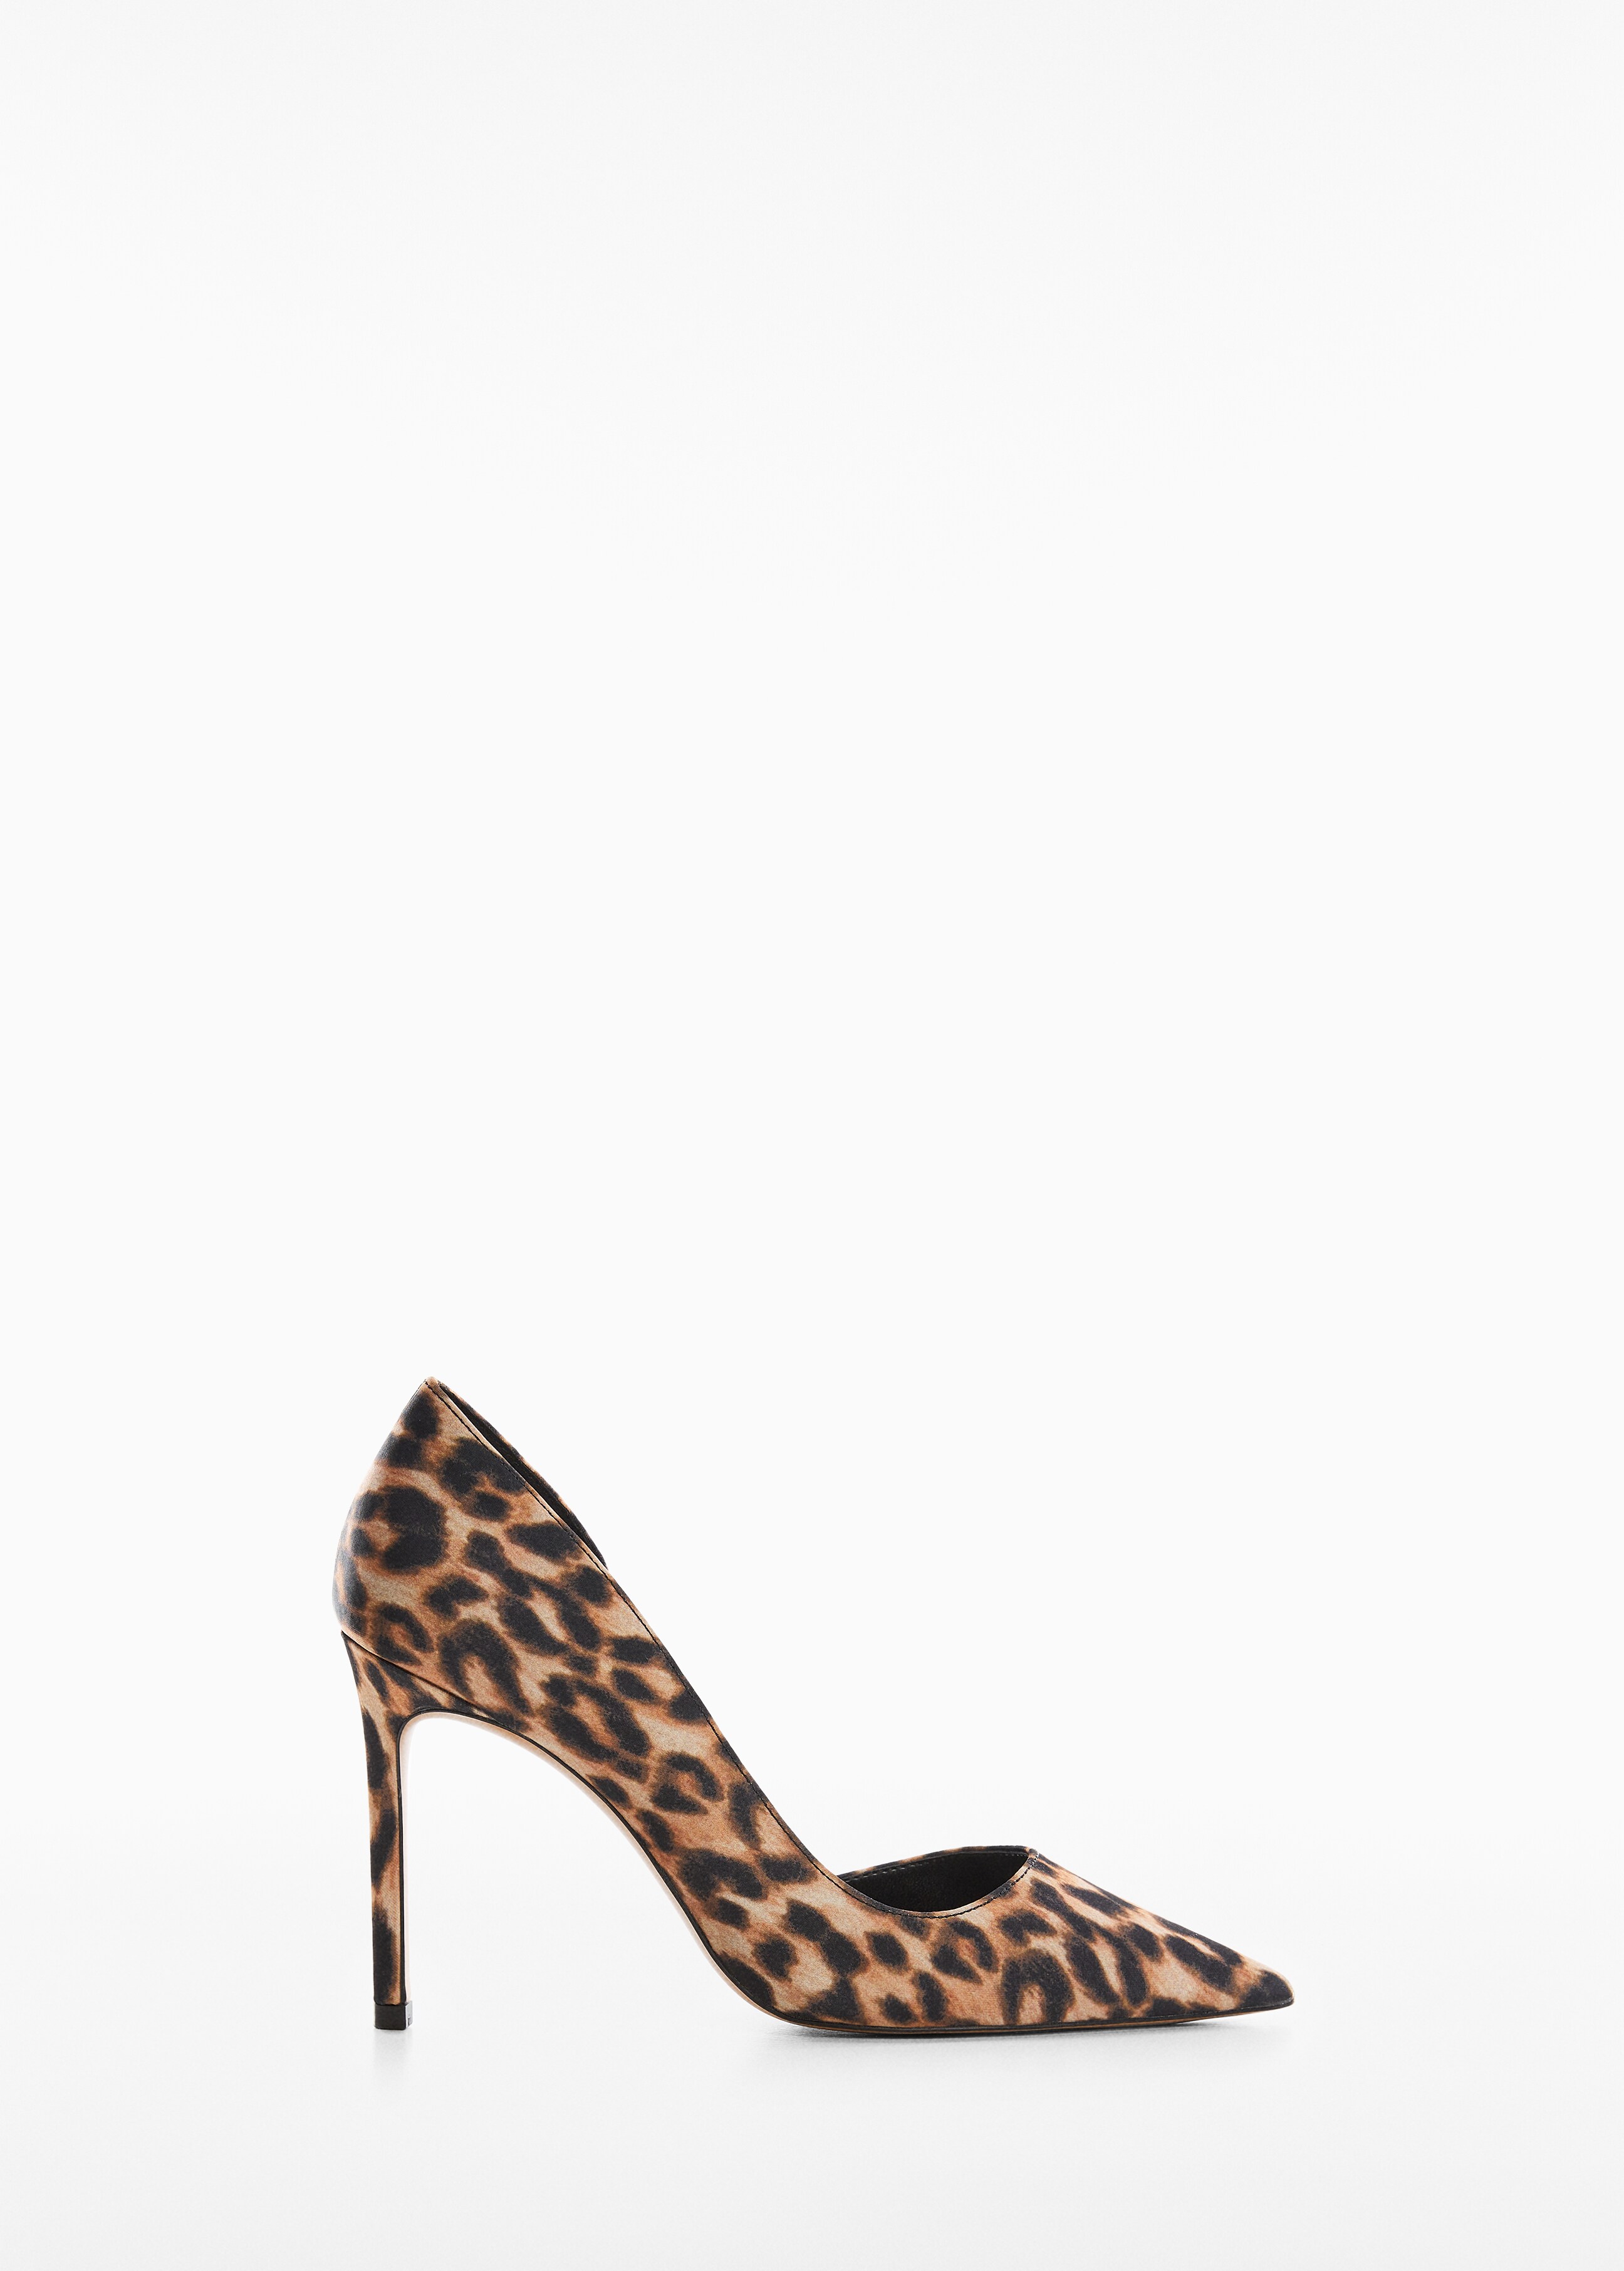 Leopard-print heeled shoes - Article without model